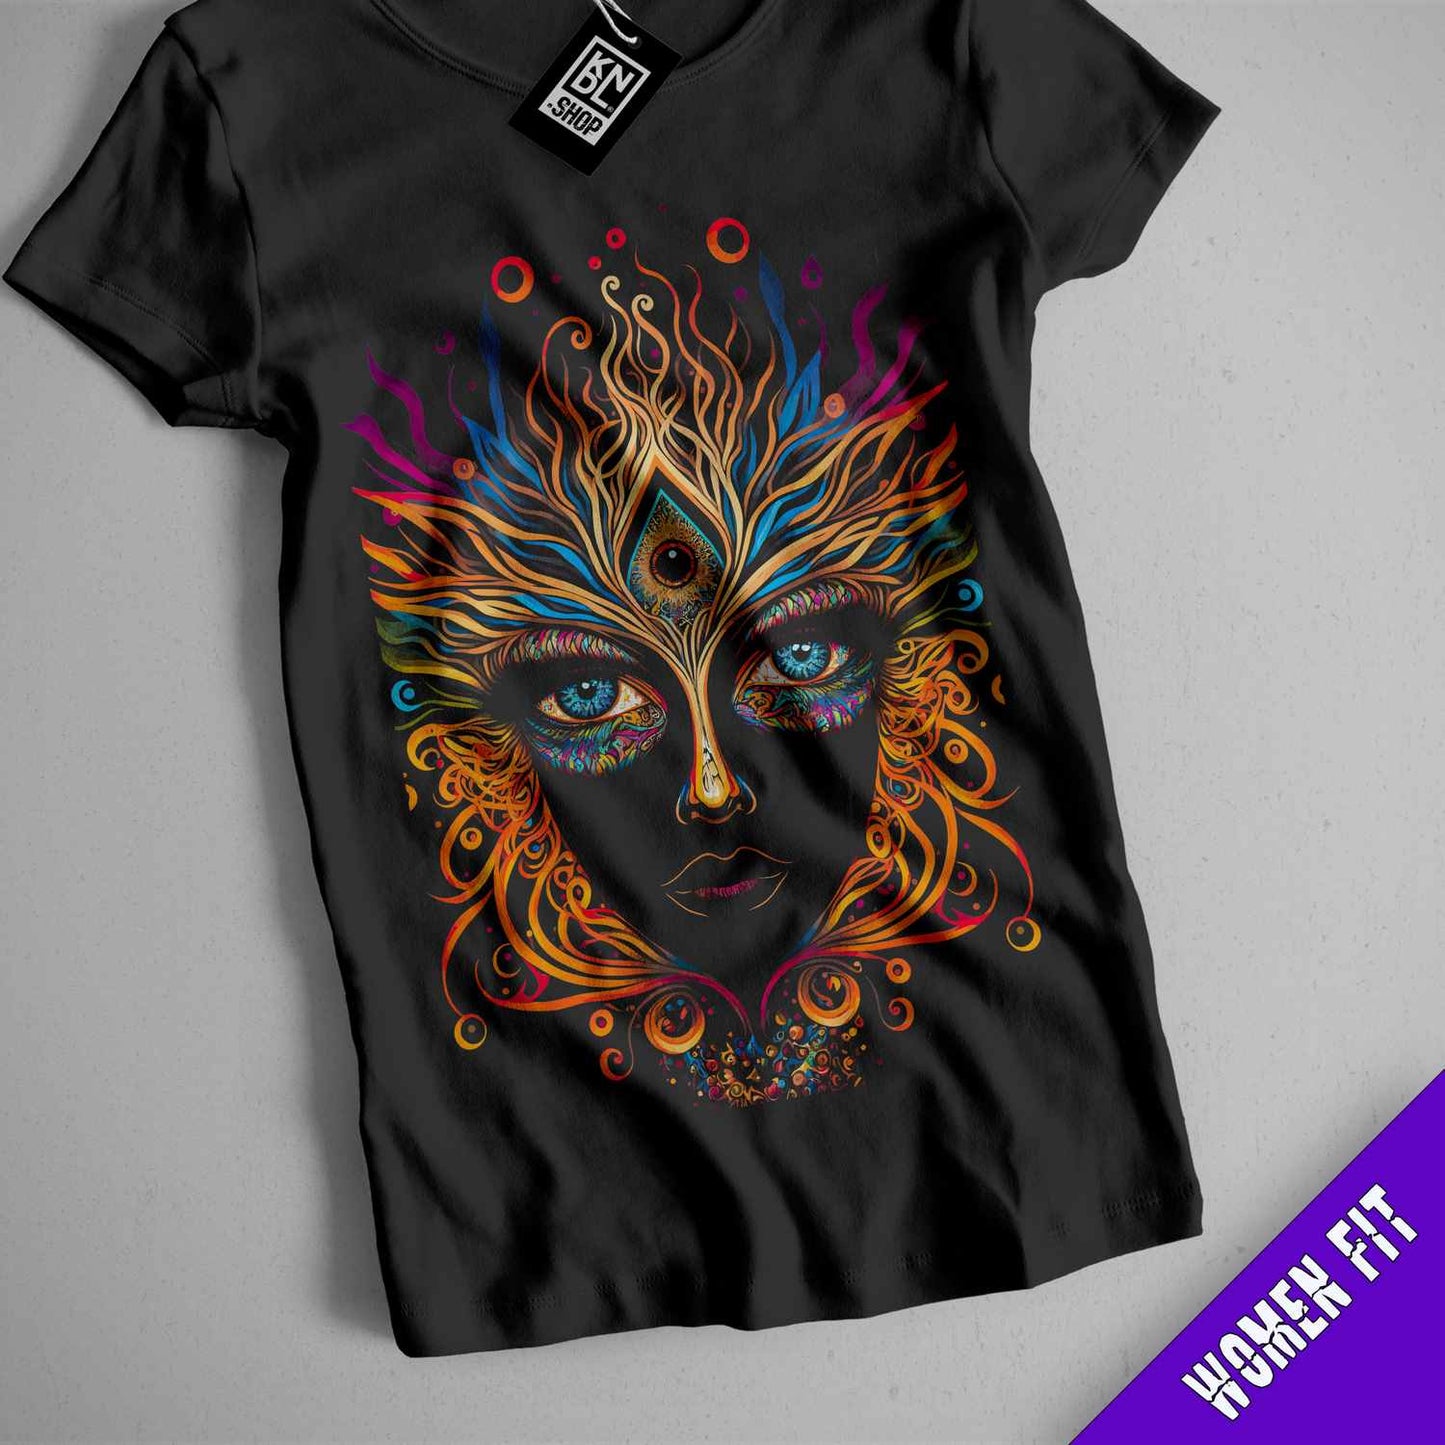 a t - shirt with a woman's face painted on it